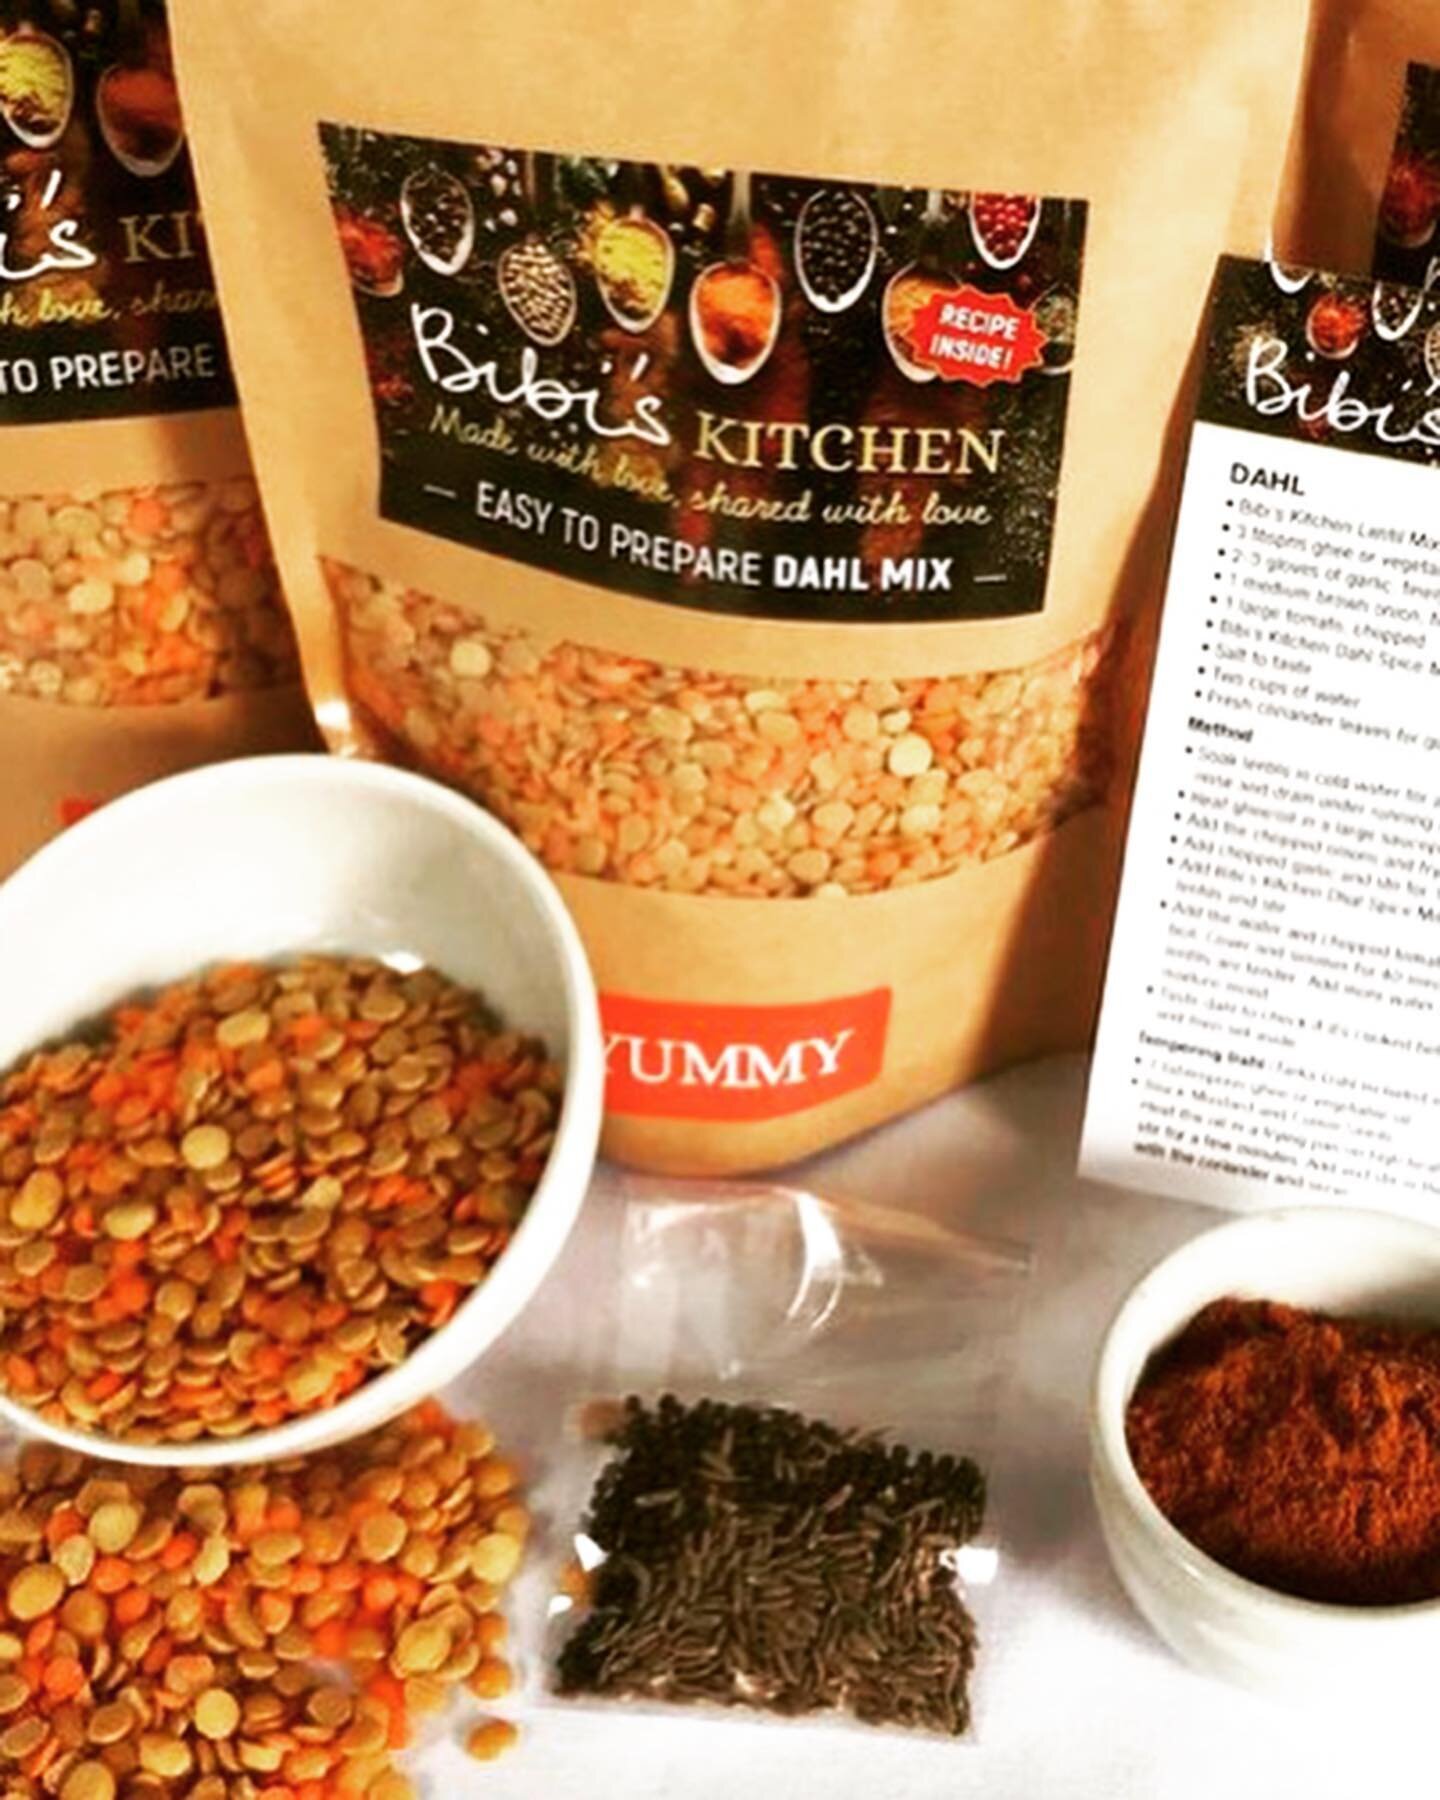 Did you know Bibis kitchen spice blend (hand blended) include up to 12 individual spices to give you maximum flavour?  You can cook delicious butter chicken , tandoori dishes or just simple stir fry, soups or salads. 
Have you tried any yet ? 
Listin